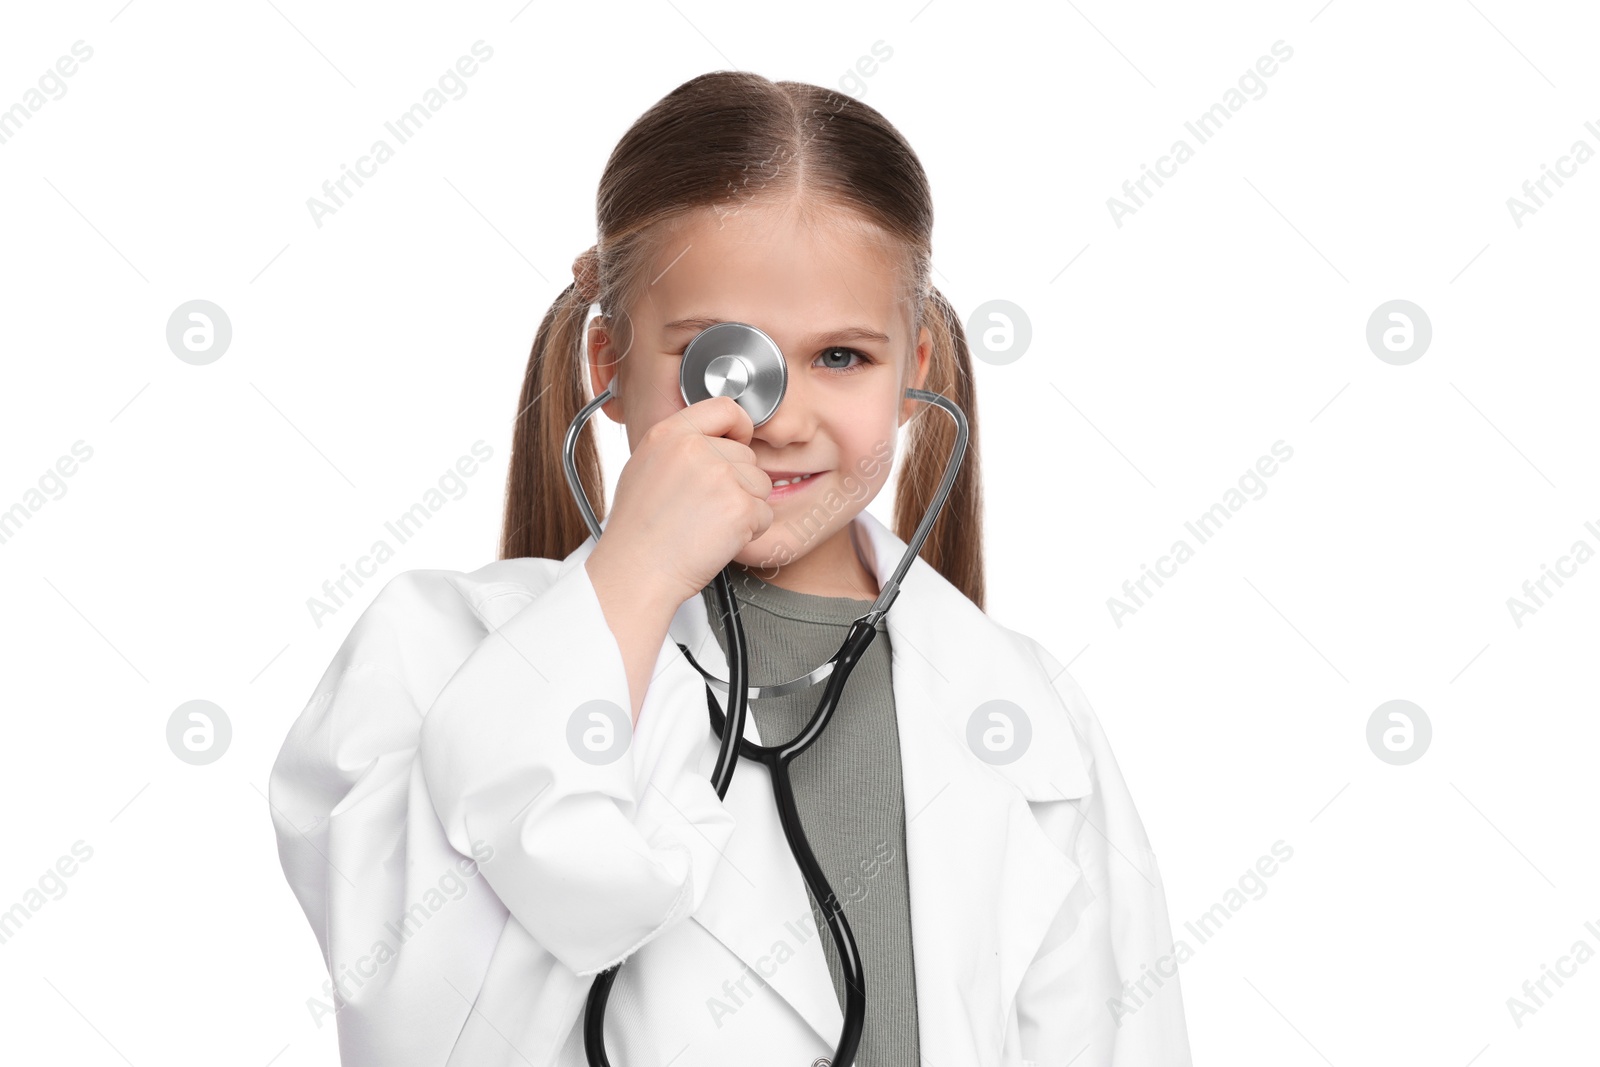 Photo of Little girl in medical uniform with stethoscope on white background